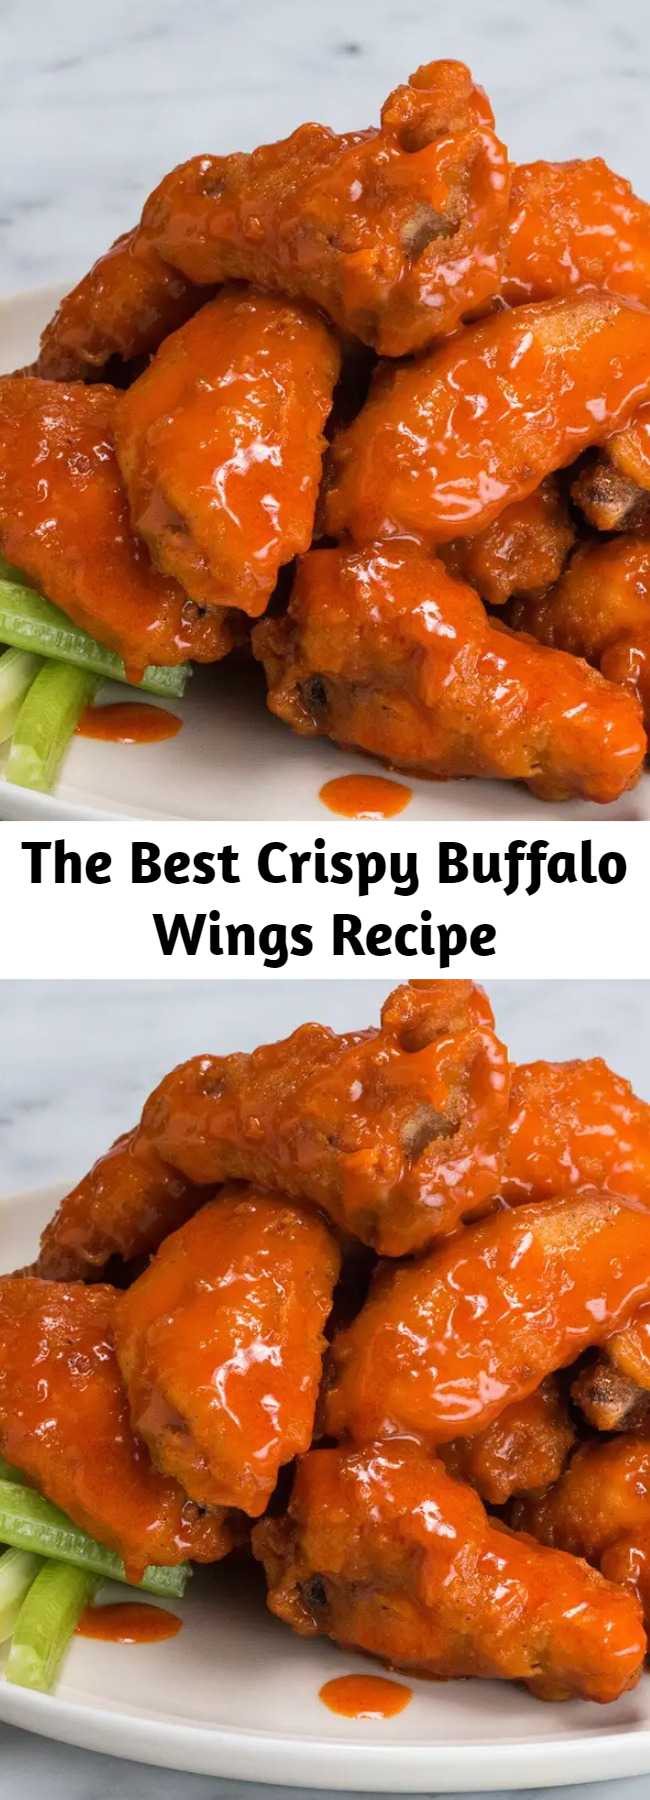 The Best Crispy Buffalo Wings Recipe - Your weekend plans need to include making these insanely crispy buffalo wings.